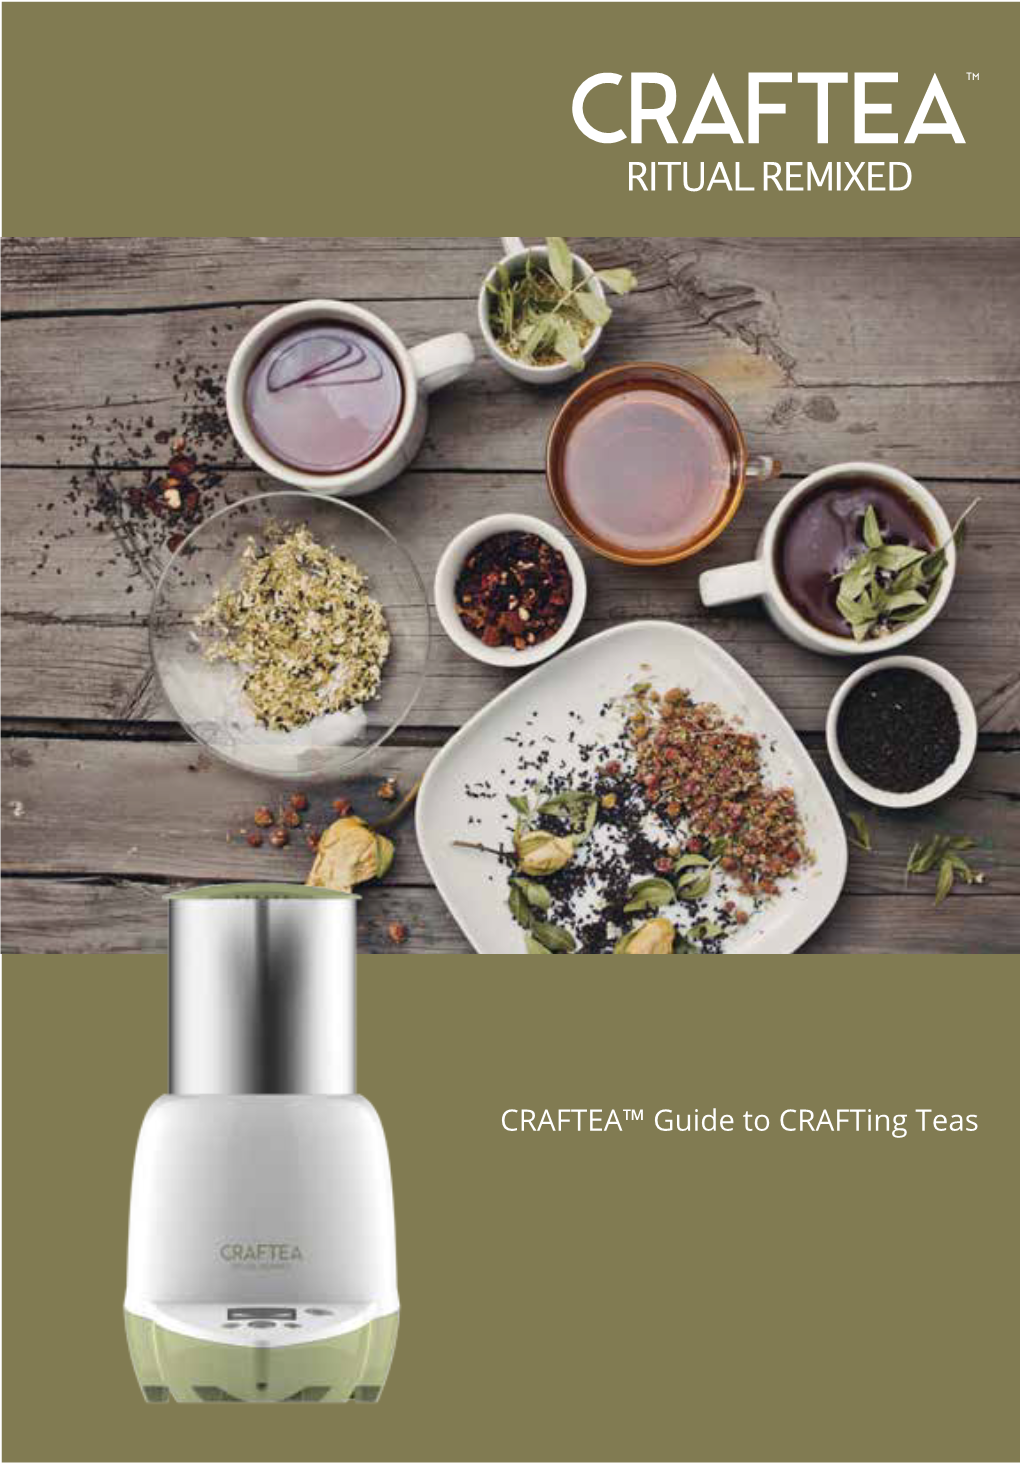 CRAFTEA™ Guide to Crafting Teas Congrats! You Went and Got Yourself a CRAFTEA™, and You’Re Excited to Start Making Your Own Crafted Teas at Home